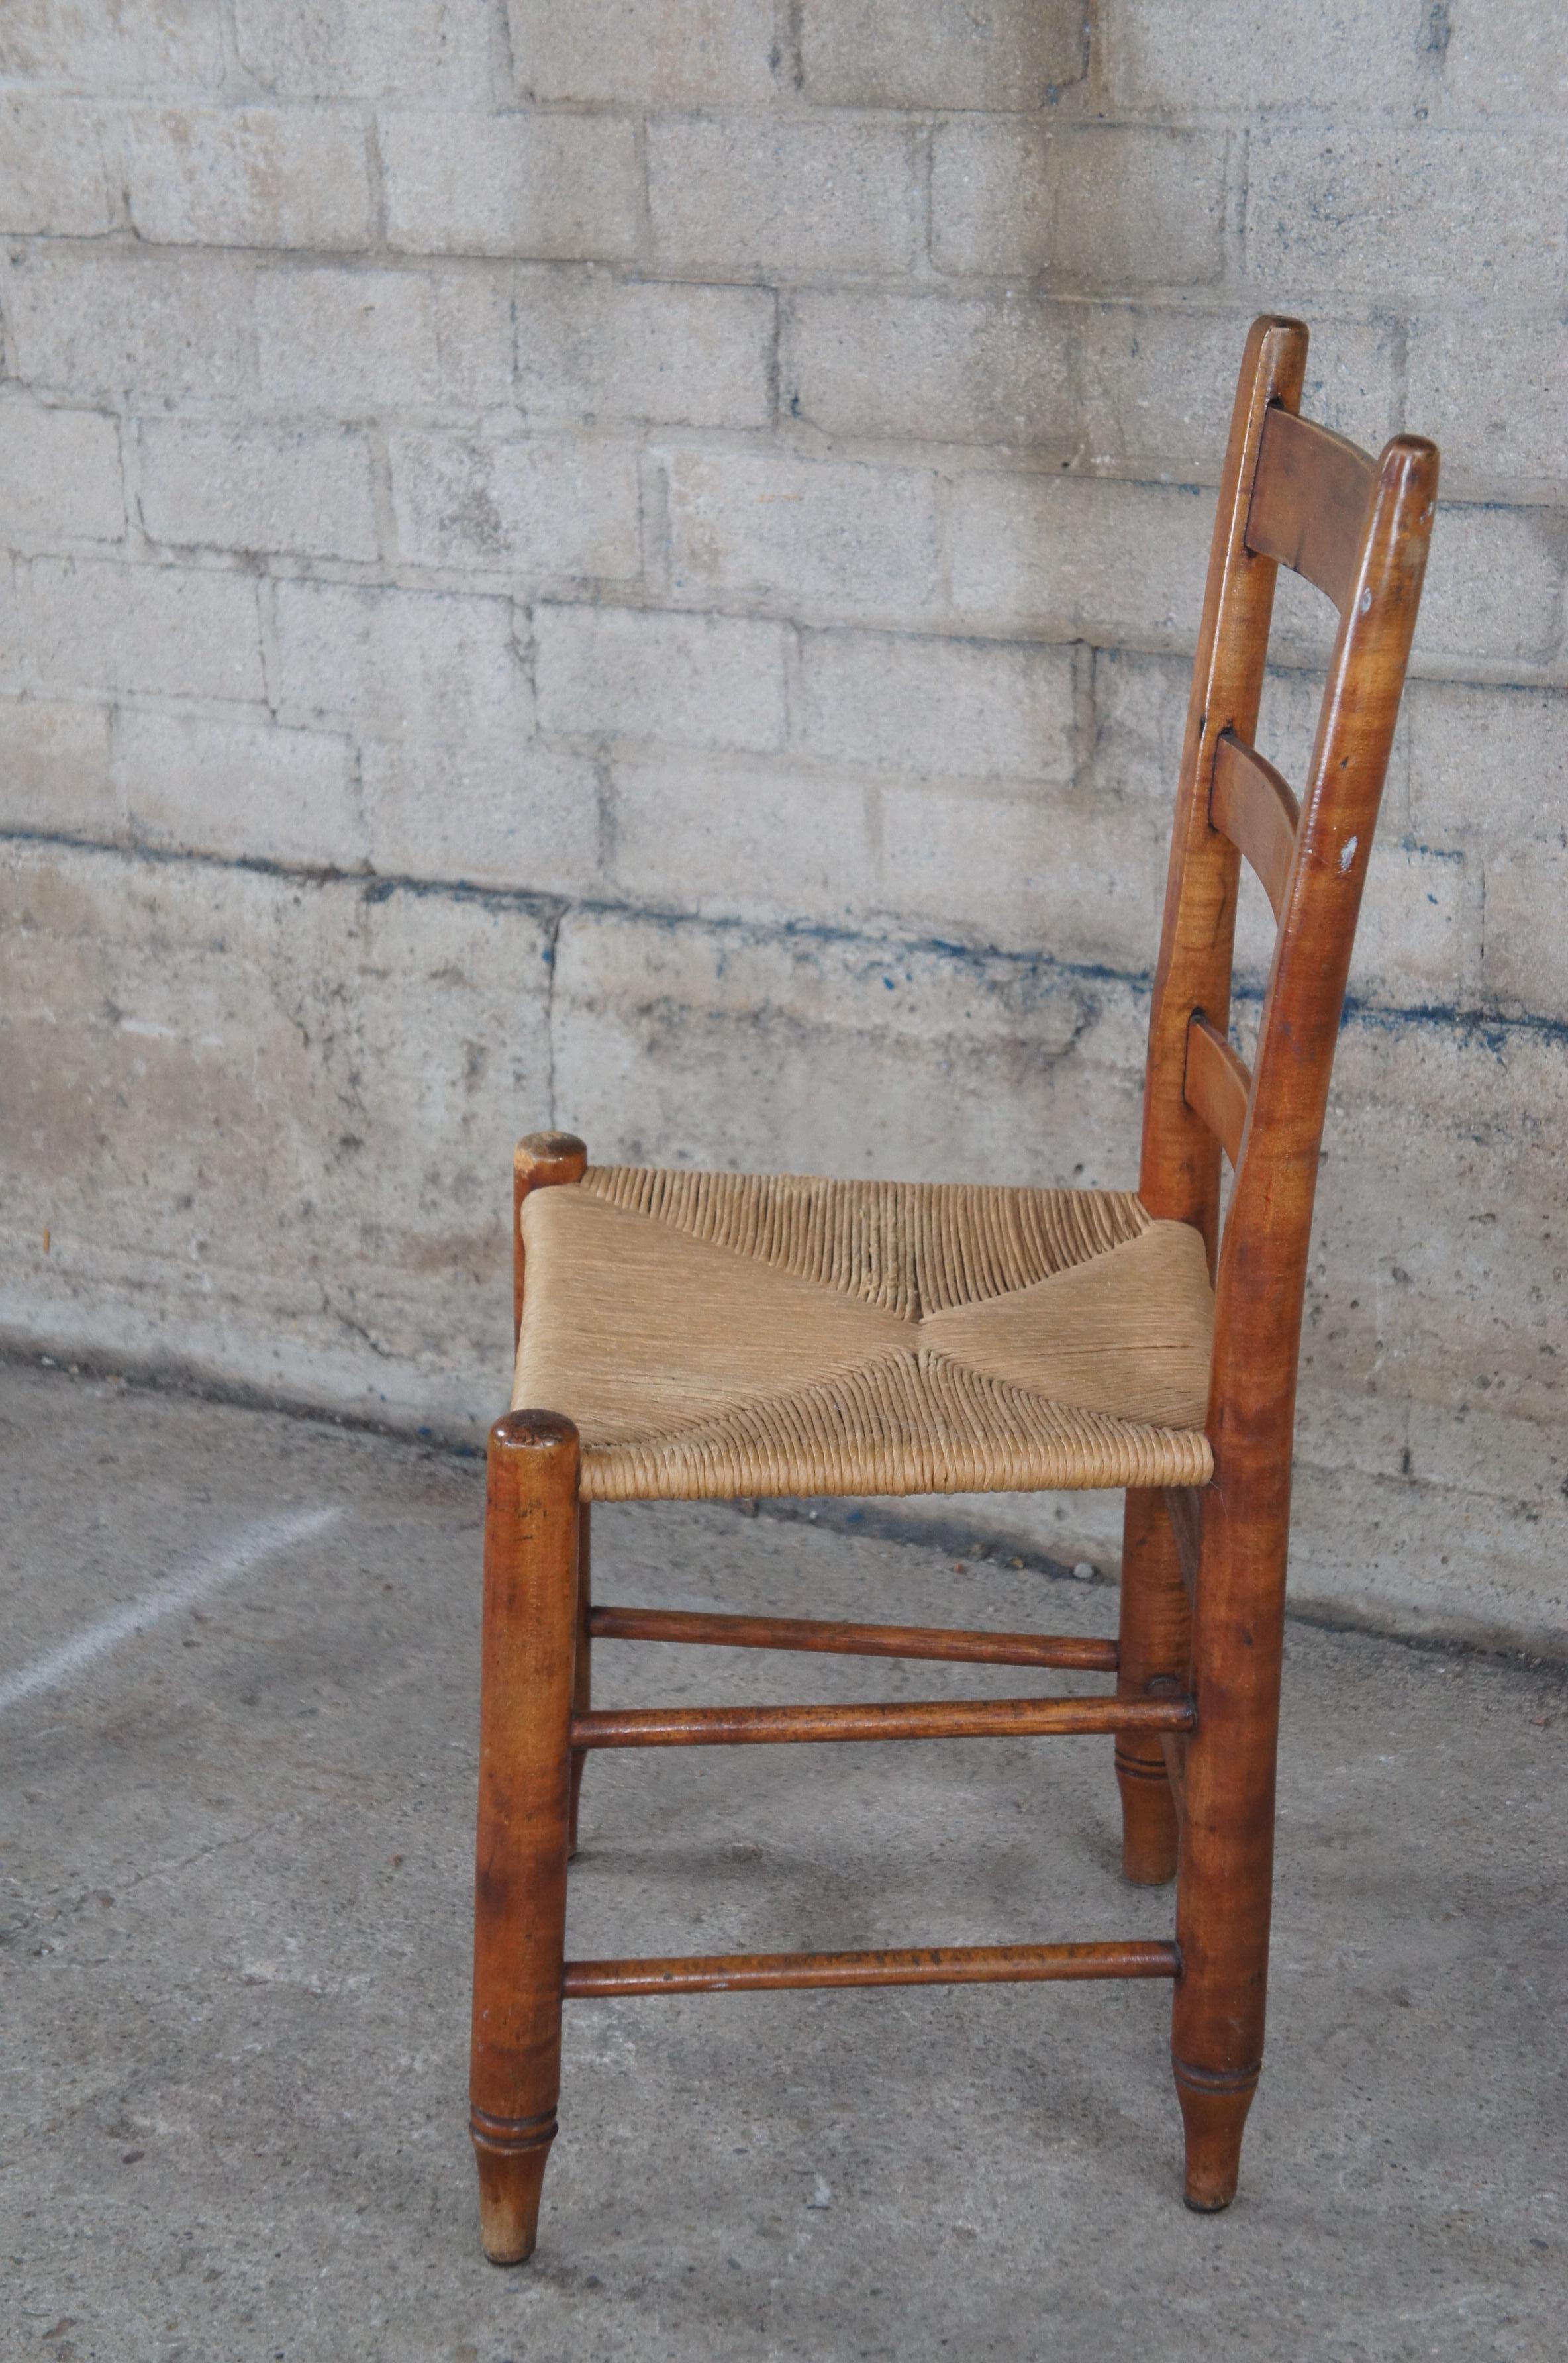 antique ladderback chairs